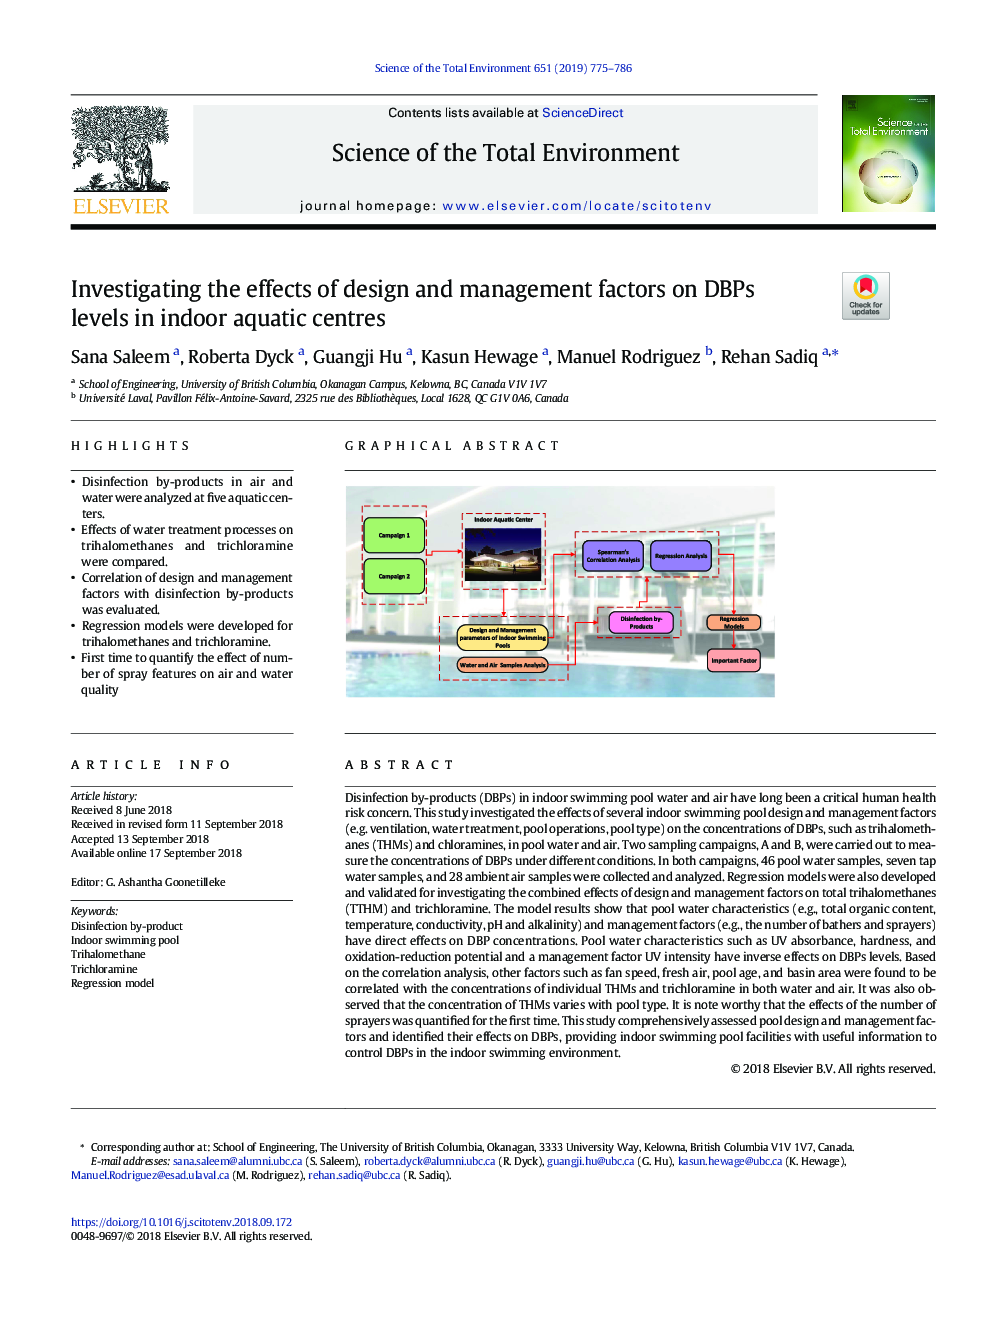 Investigating the effects of design and management factors on DBPs levels in indoor aquatic centres